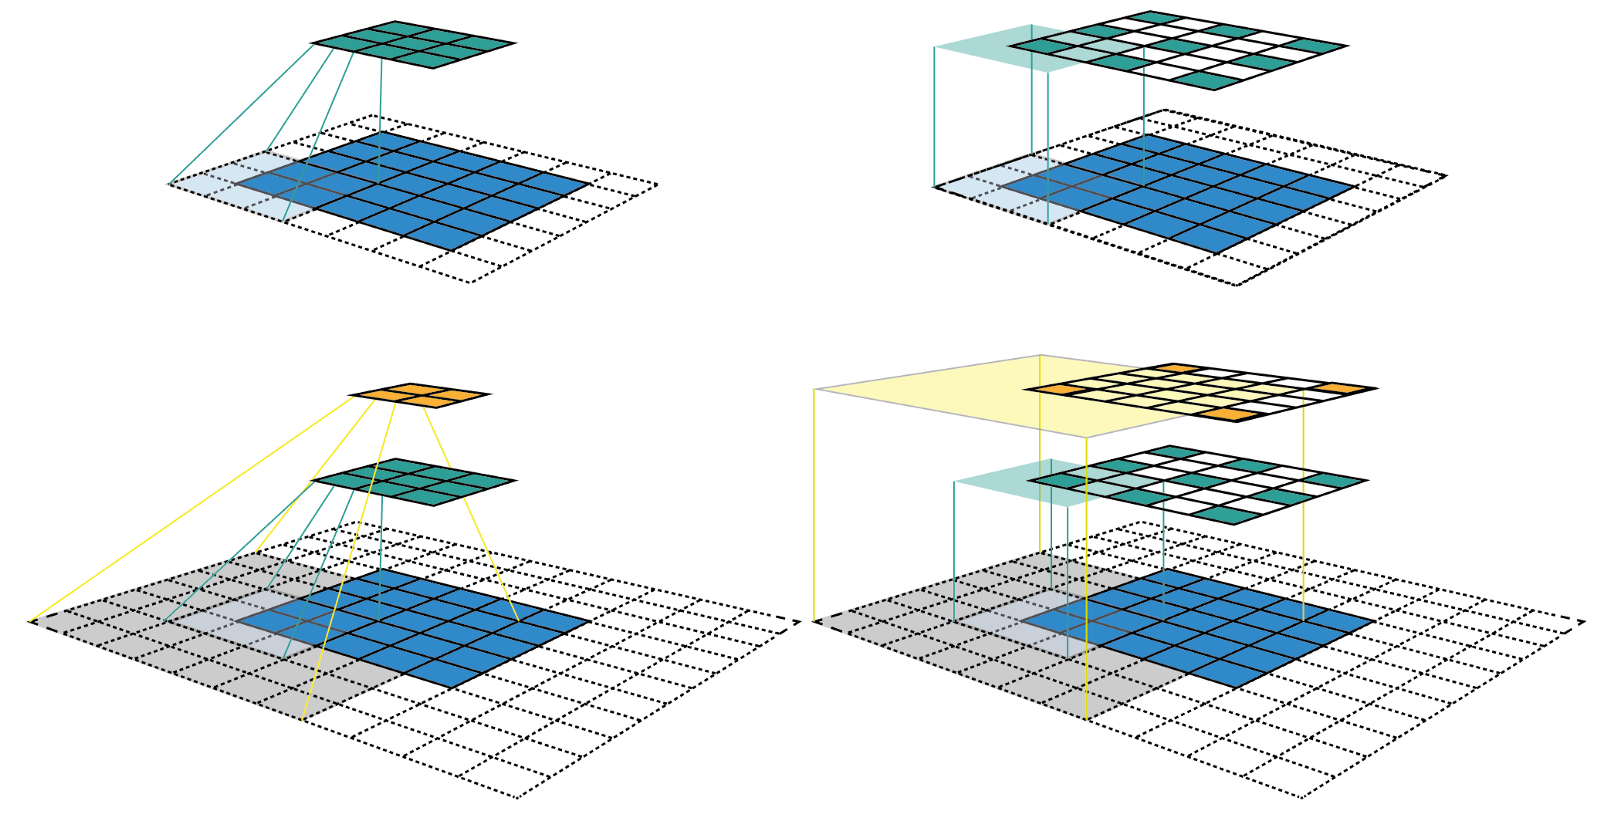 
Figure 1: Two ways to visualize CNN feature maps. In all cases, we uses the convolution C with kernel size k = 3x3, padding size p = 1x1, stride s = 2x2. (Top row) Applying the convolution on a 5x5 input map to produce the 3x3 green feature map. (Bottom row) Applying the same convolution on top of the green feature map to produce the 2x2 orange feature map. (Left column) The common way to visualize a CNN feature map. Only looking at the feature map, we do not know where a feature is looking at (the center location of its receptive field) and how big is that region (its receptive field size). It will be impossible to keep track of the receptive field information in a deep CNN. (Right column) The fixed-sized CNN feature map visualization, where the size of each feature map is fixed, and the feature is located at the center of its receptive field.